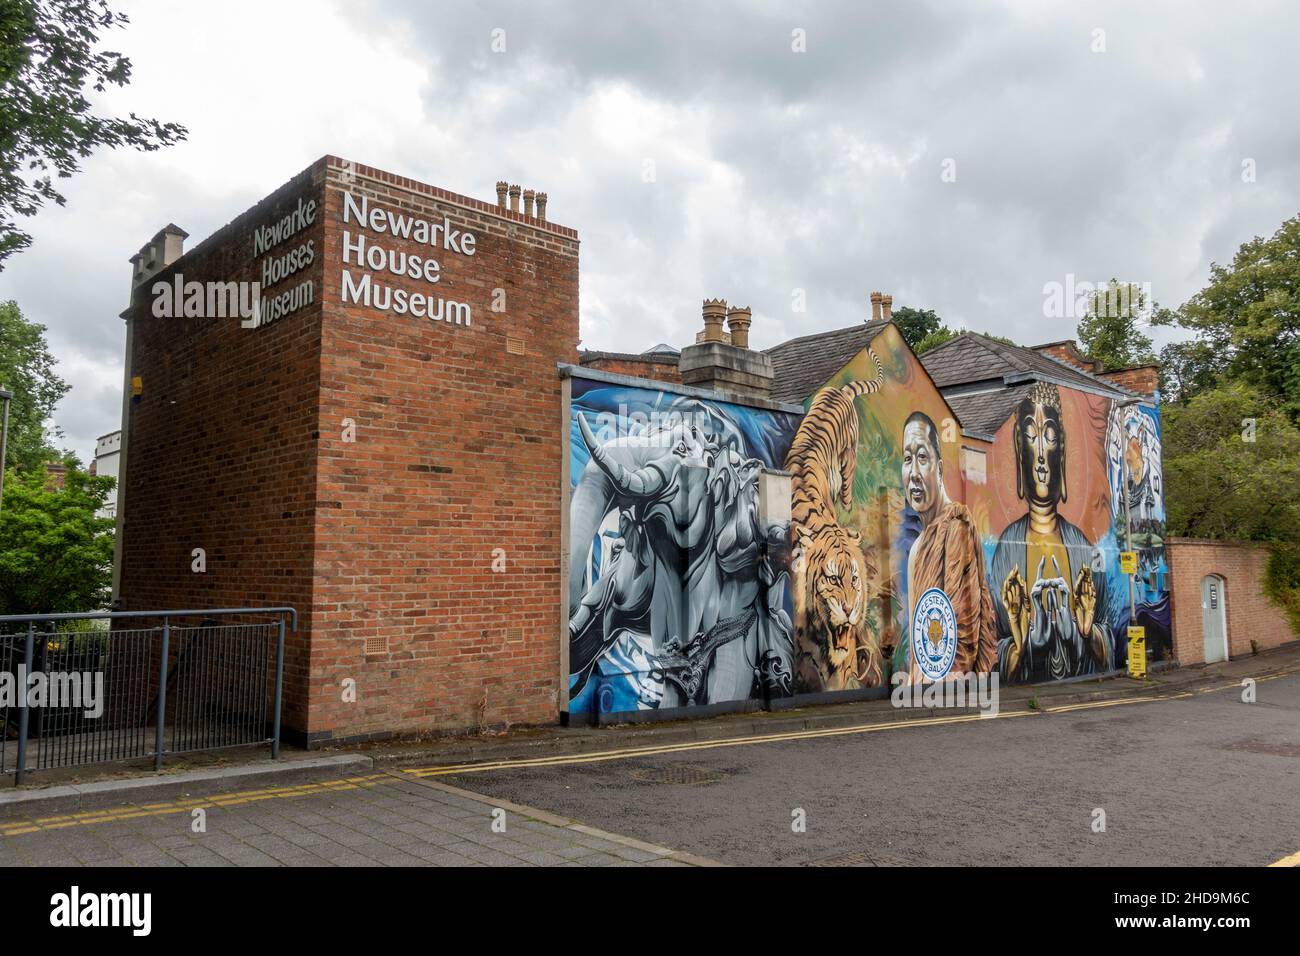 Stunning murals celebrating Leicester City FC (winning the Premier League in 2016) on the side of Newarke House Museum, Leicester, Leicestershire, UK. Stock Photo